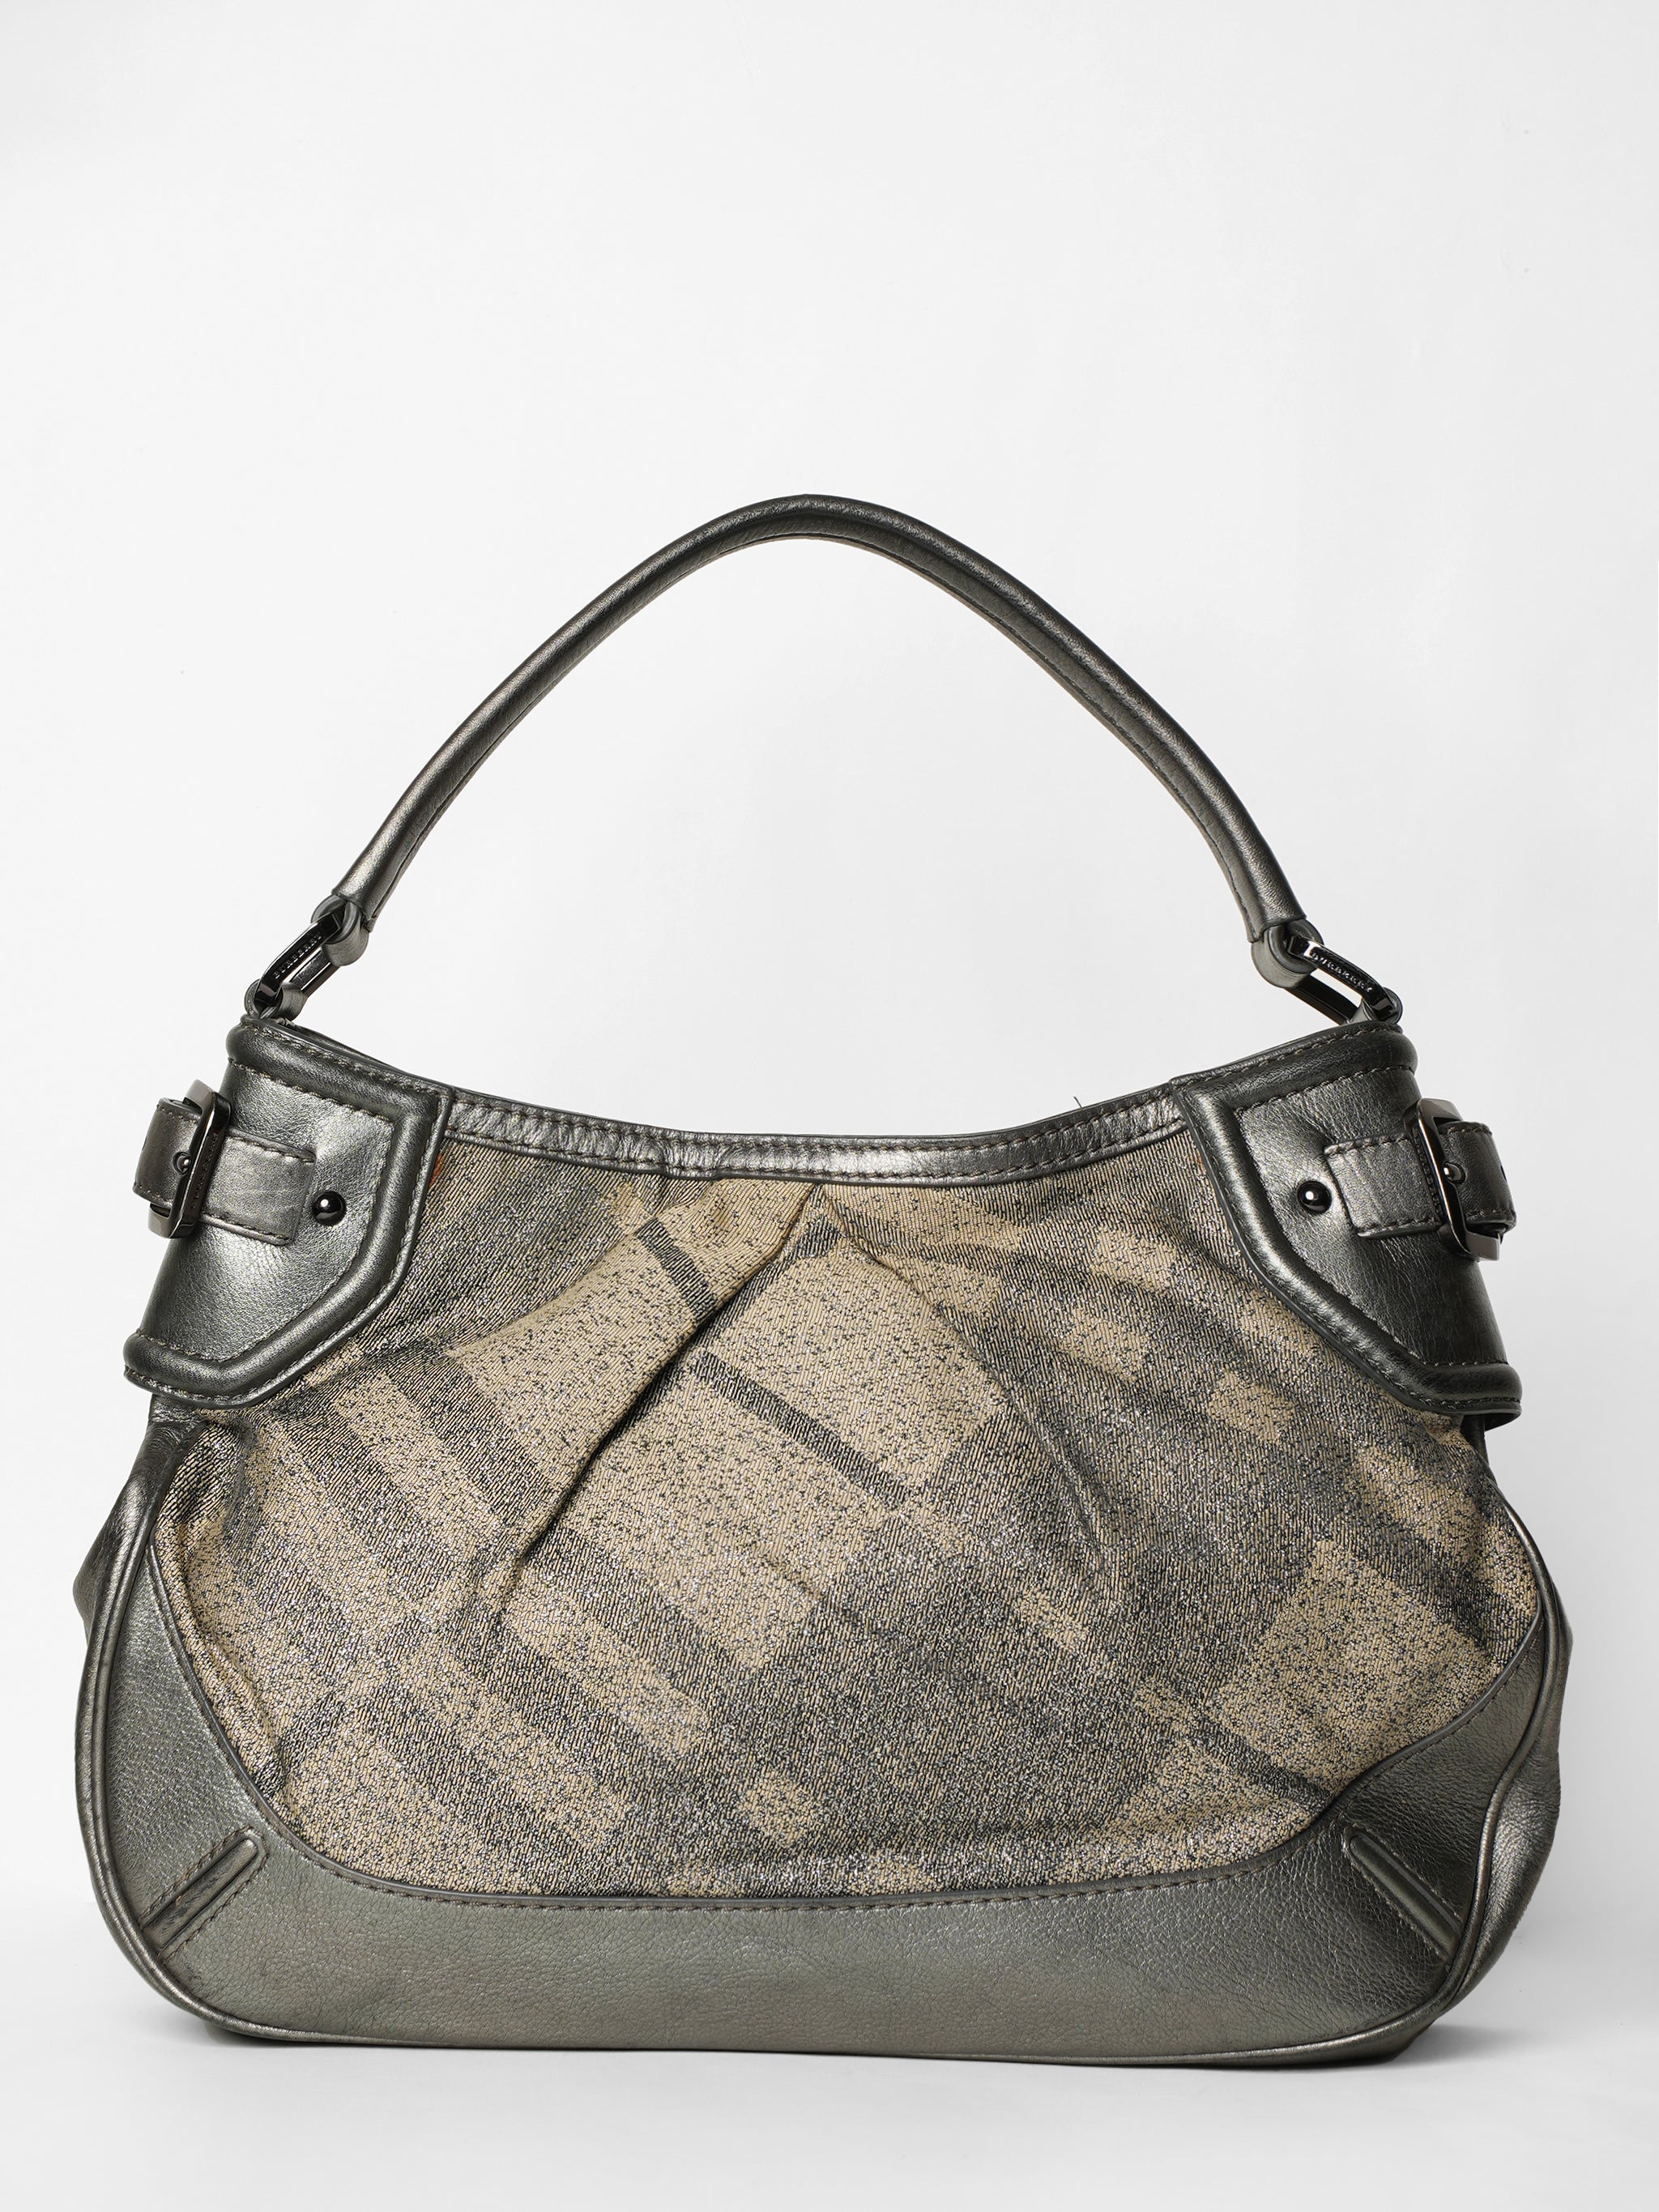 Burberry Fairby Hobo Shimmer Nova Check Canvas With Leather Bag